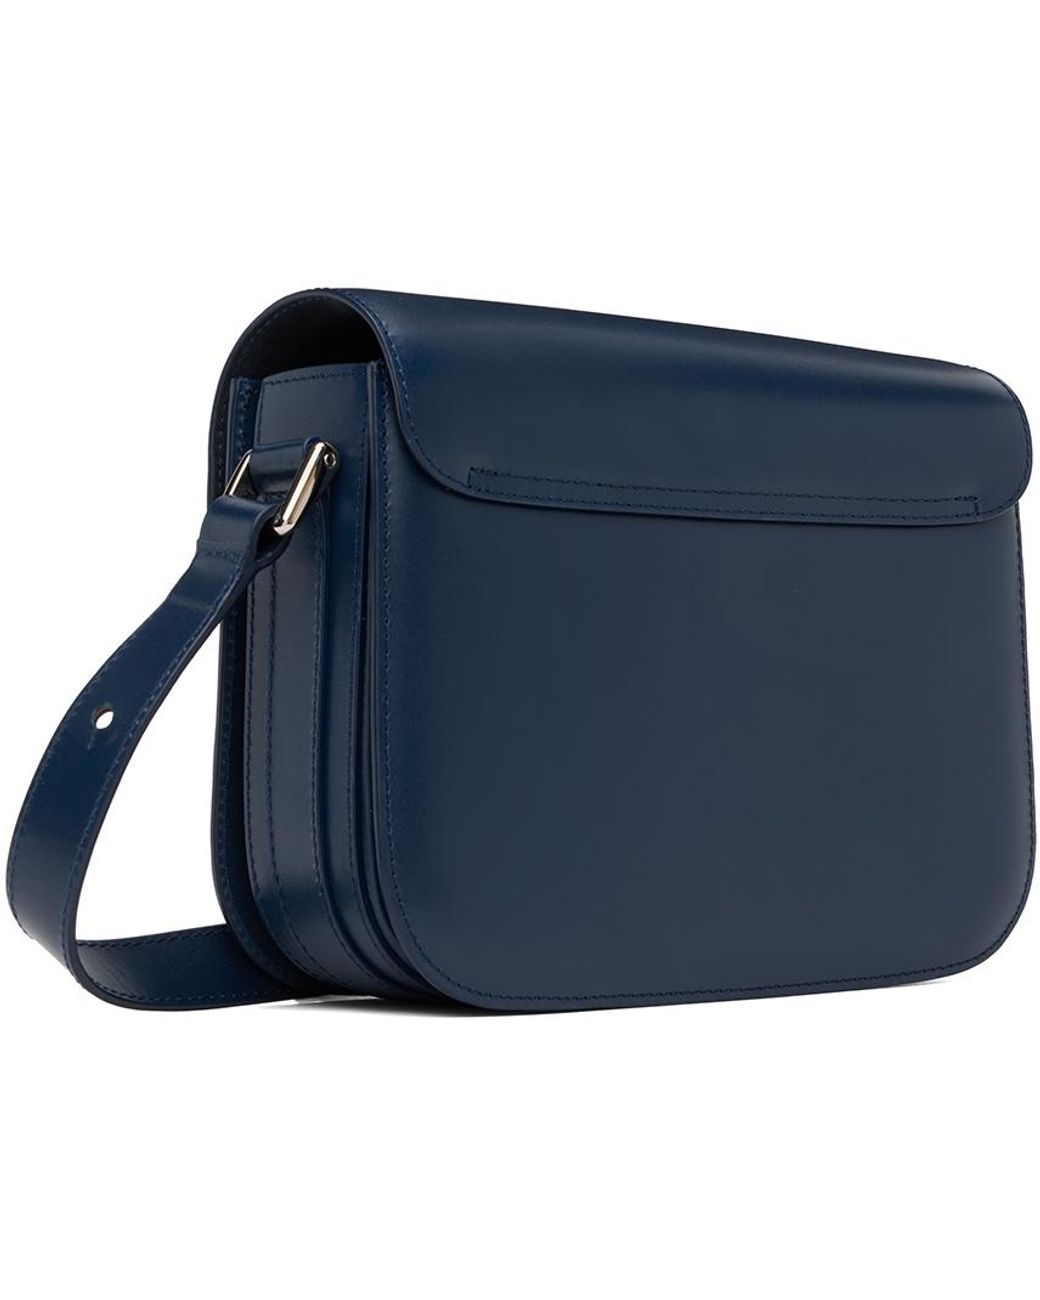 A.P.C. - Grace Small Smooth Leather Bag - Navy blue